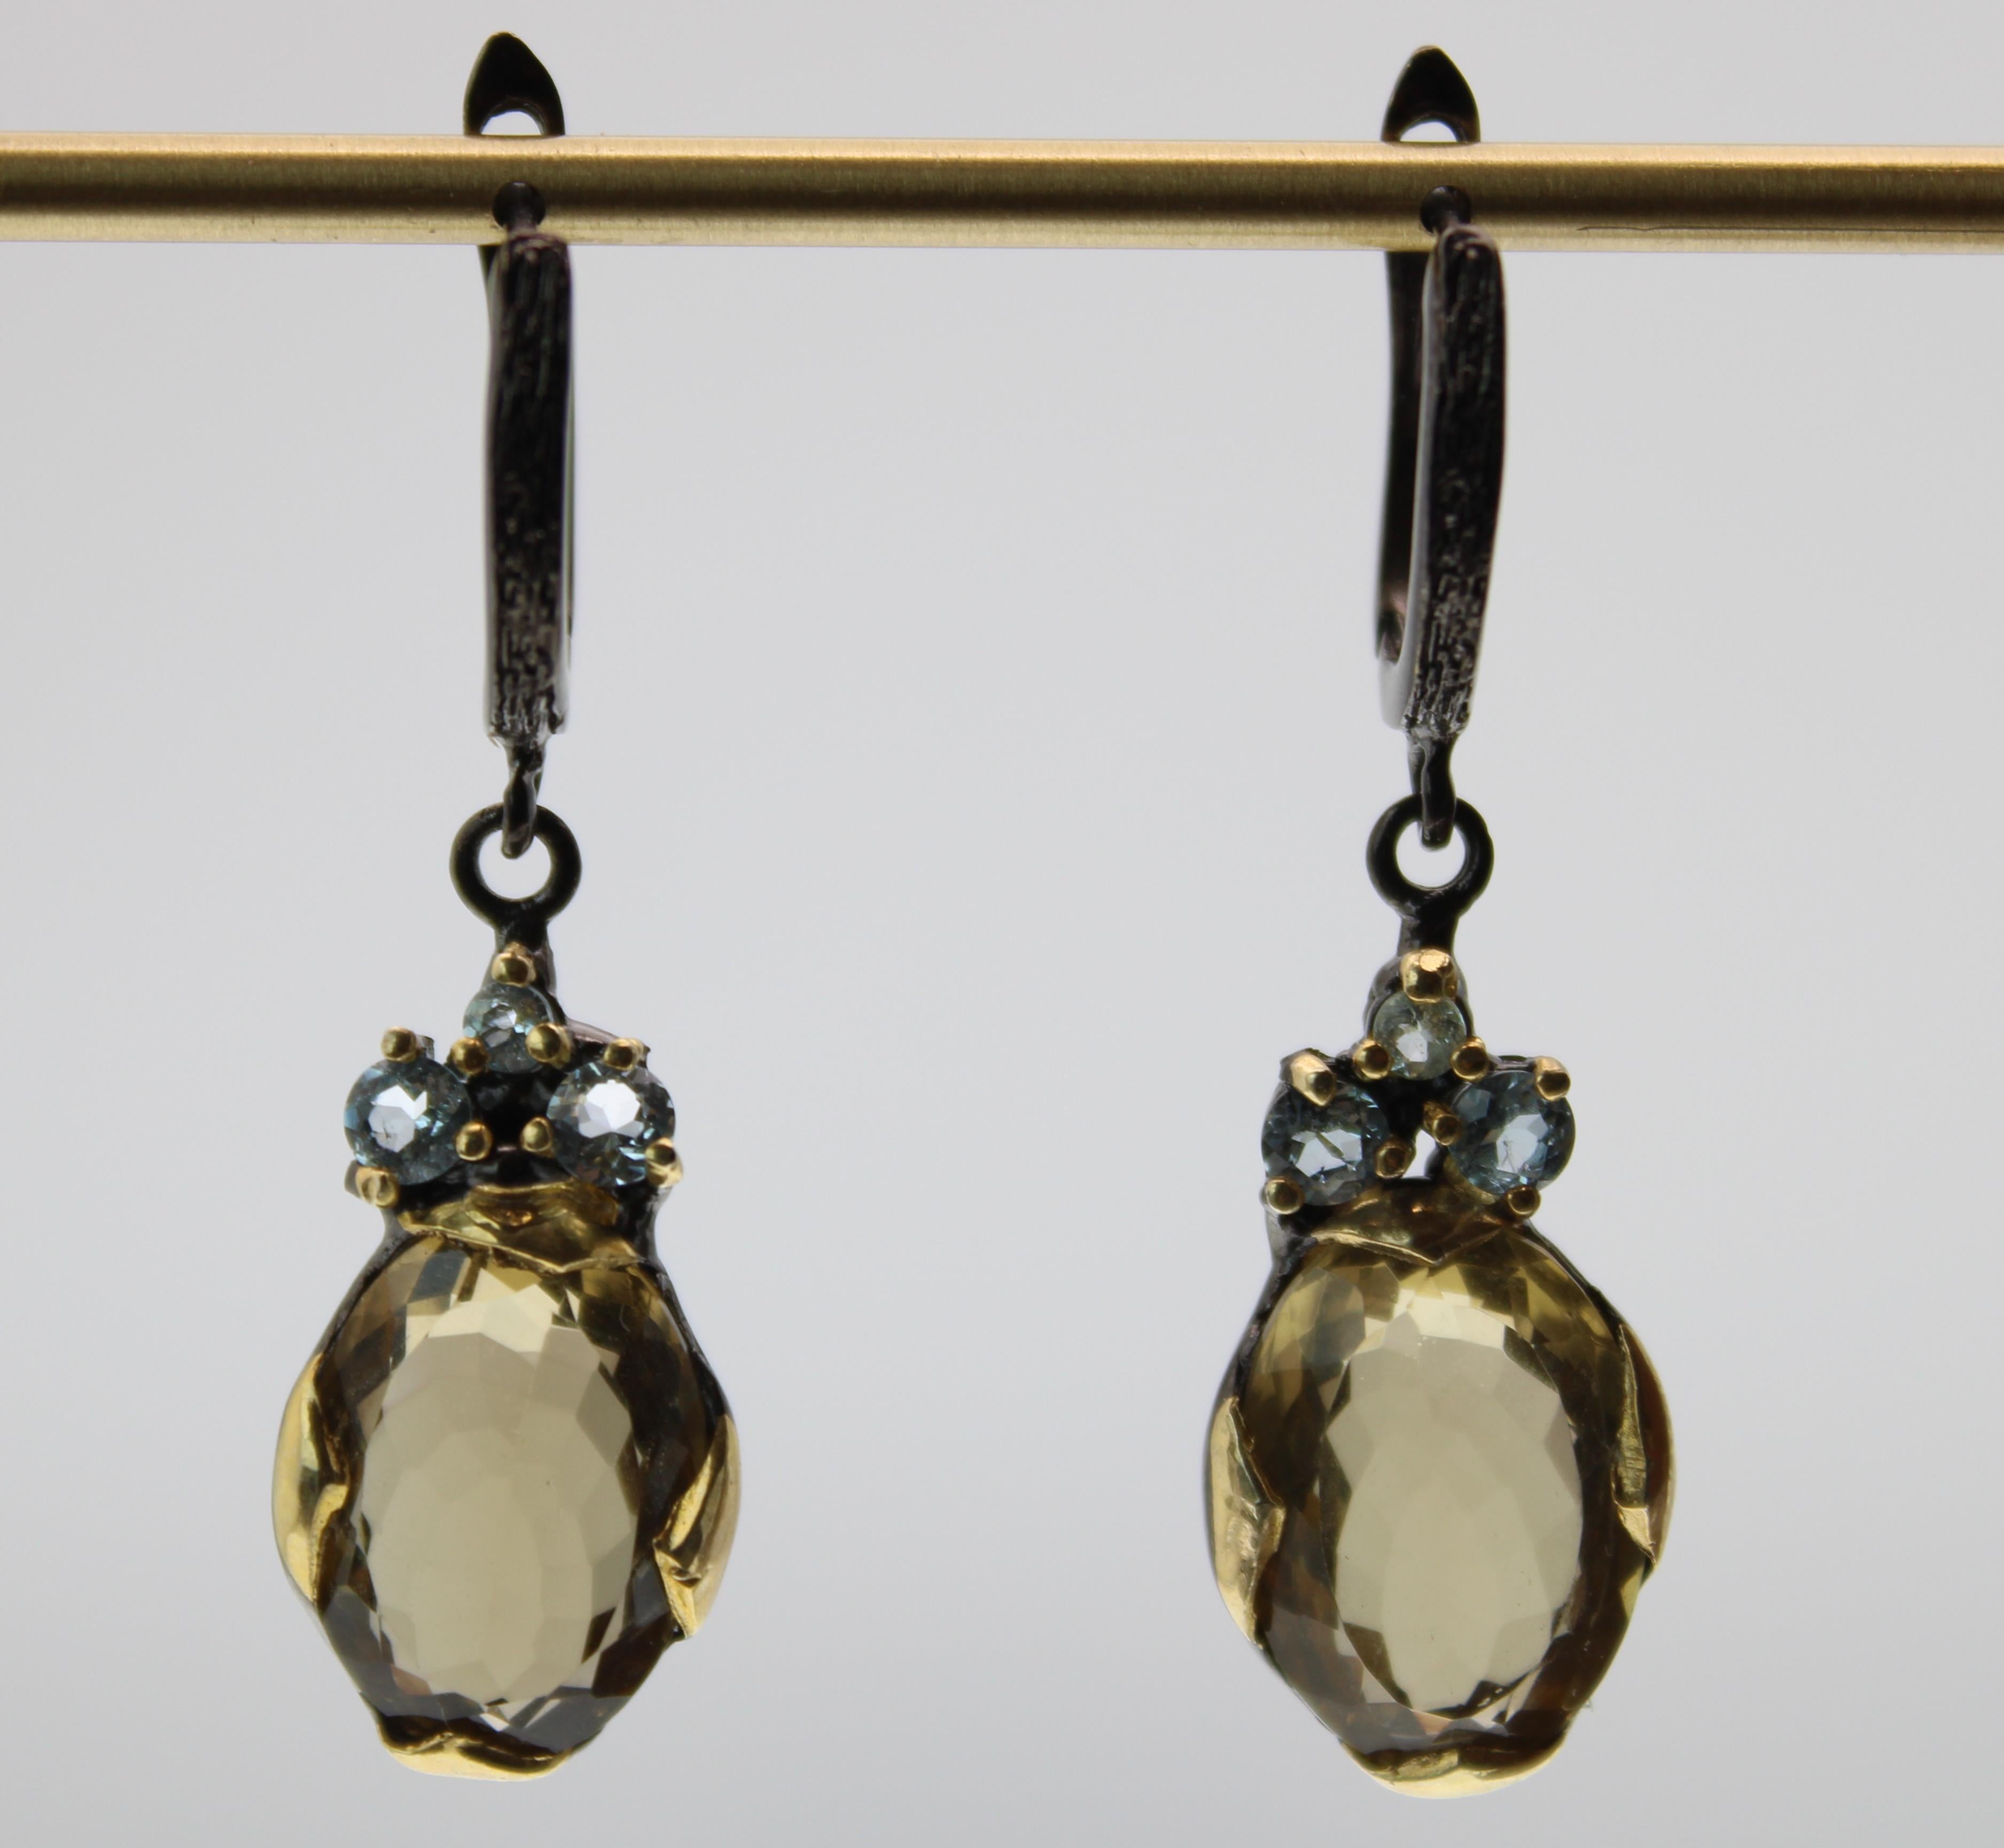 Multifaceted rose cut oval yellow lemon quartz earrings with three blue topaz round stones. These earrings are cast and set in 14K gold plating and black rhodium over sterling silver. When held to the light you can see the shine and luster of these